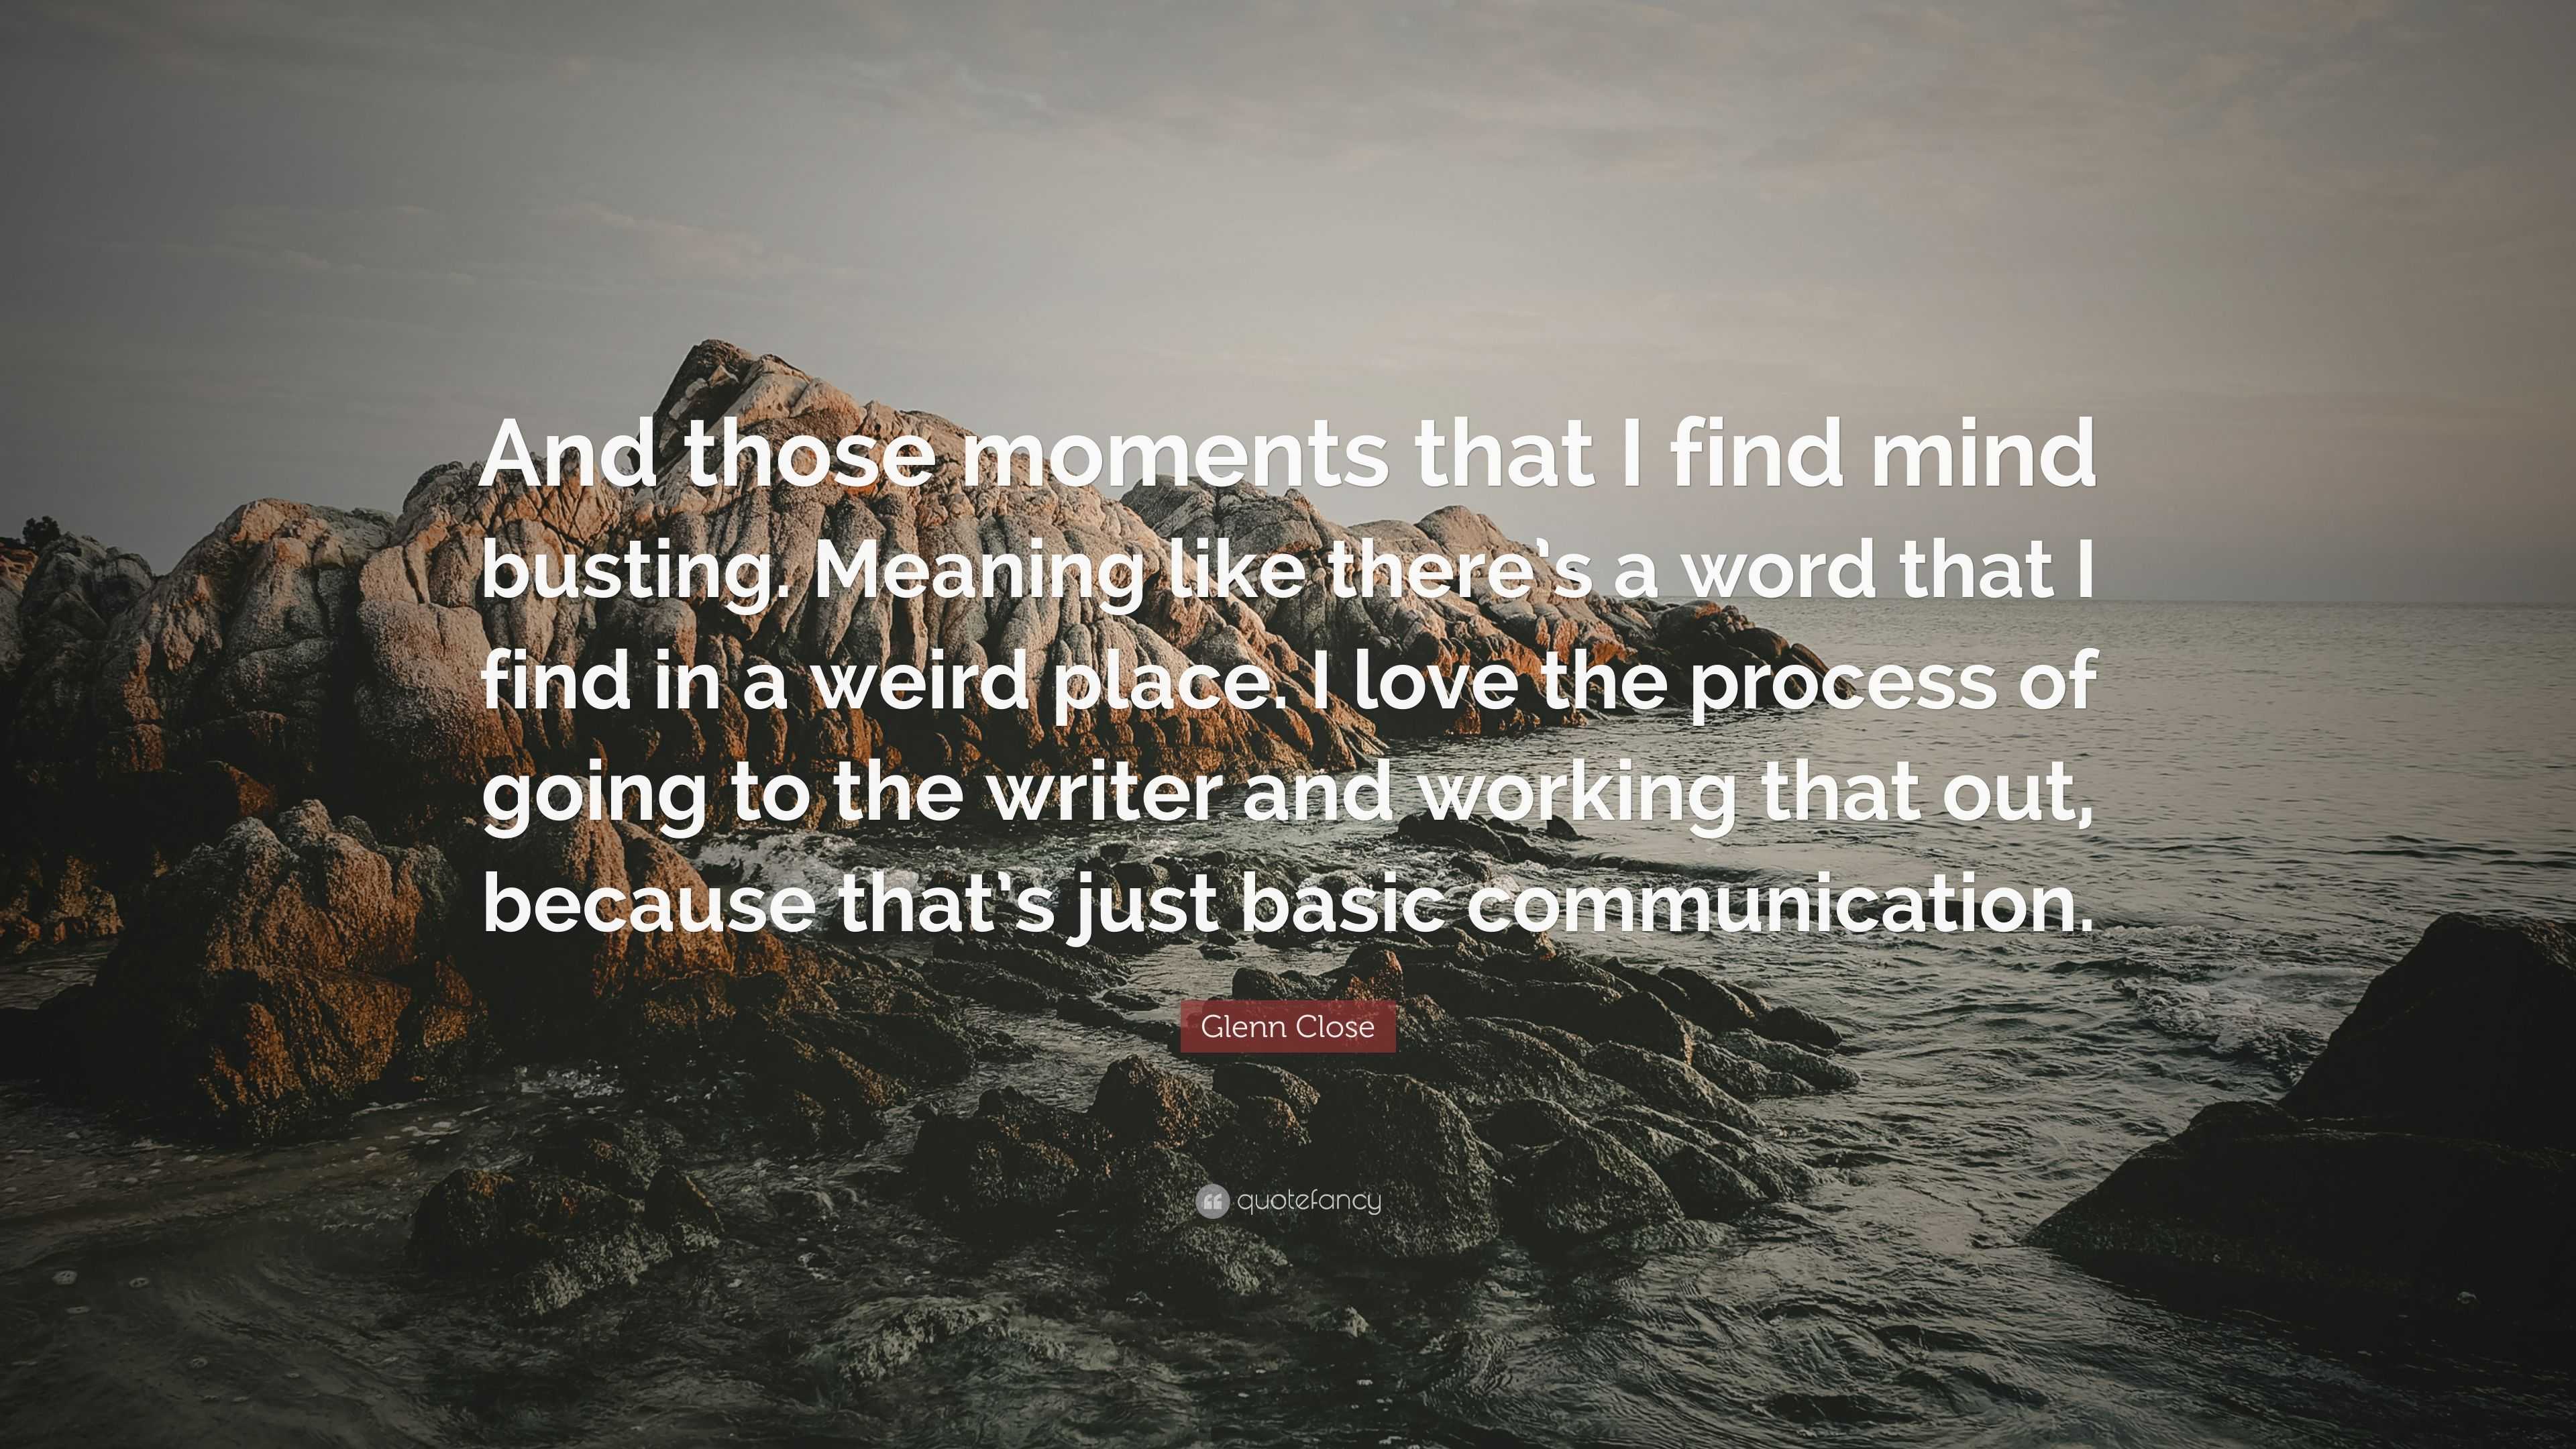 Glenn Close Quote: “And those moments that I find mind busting